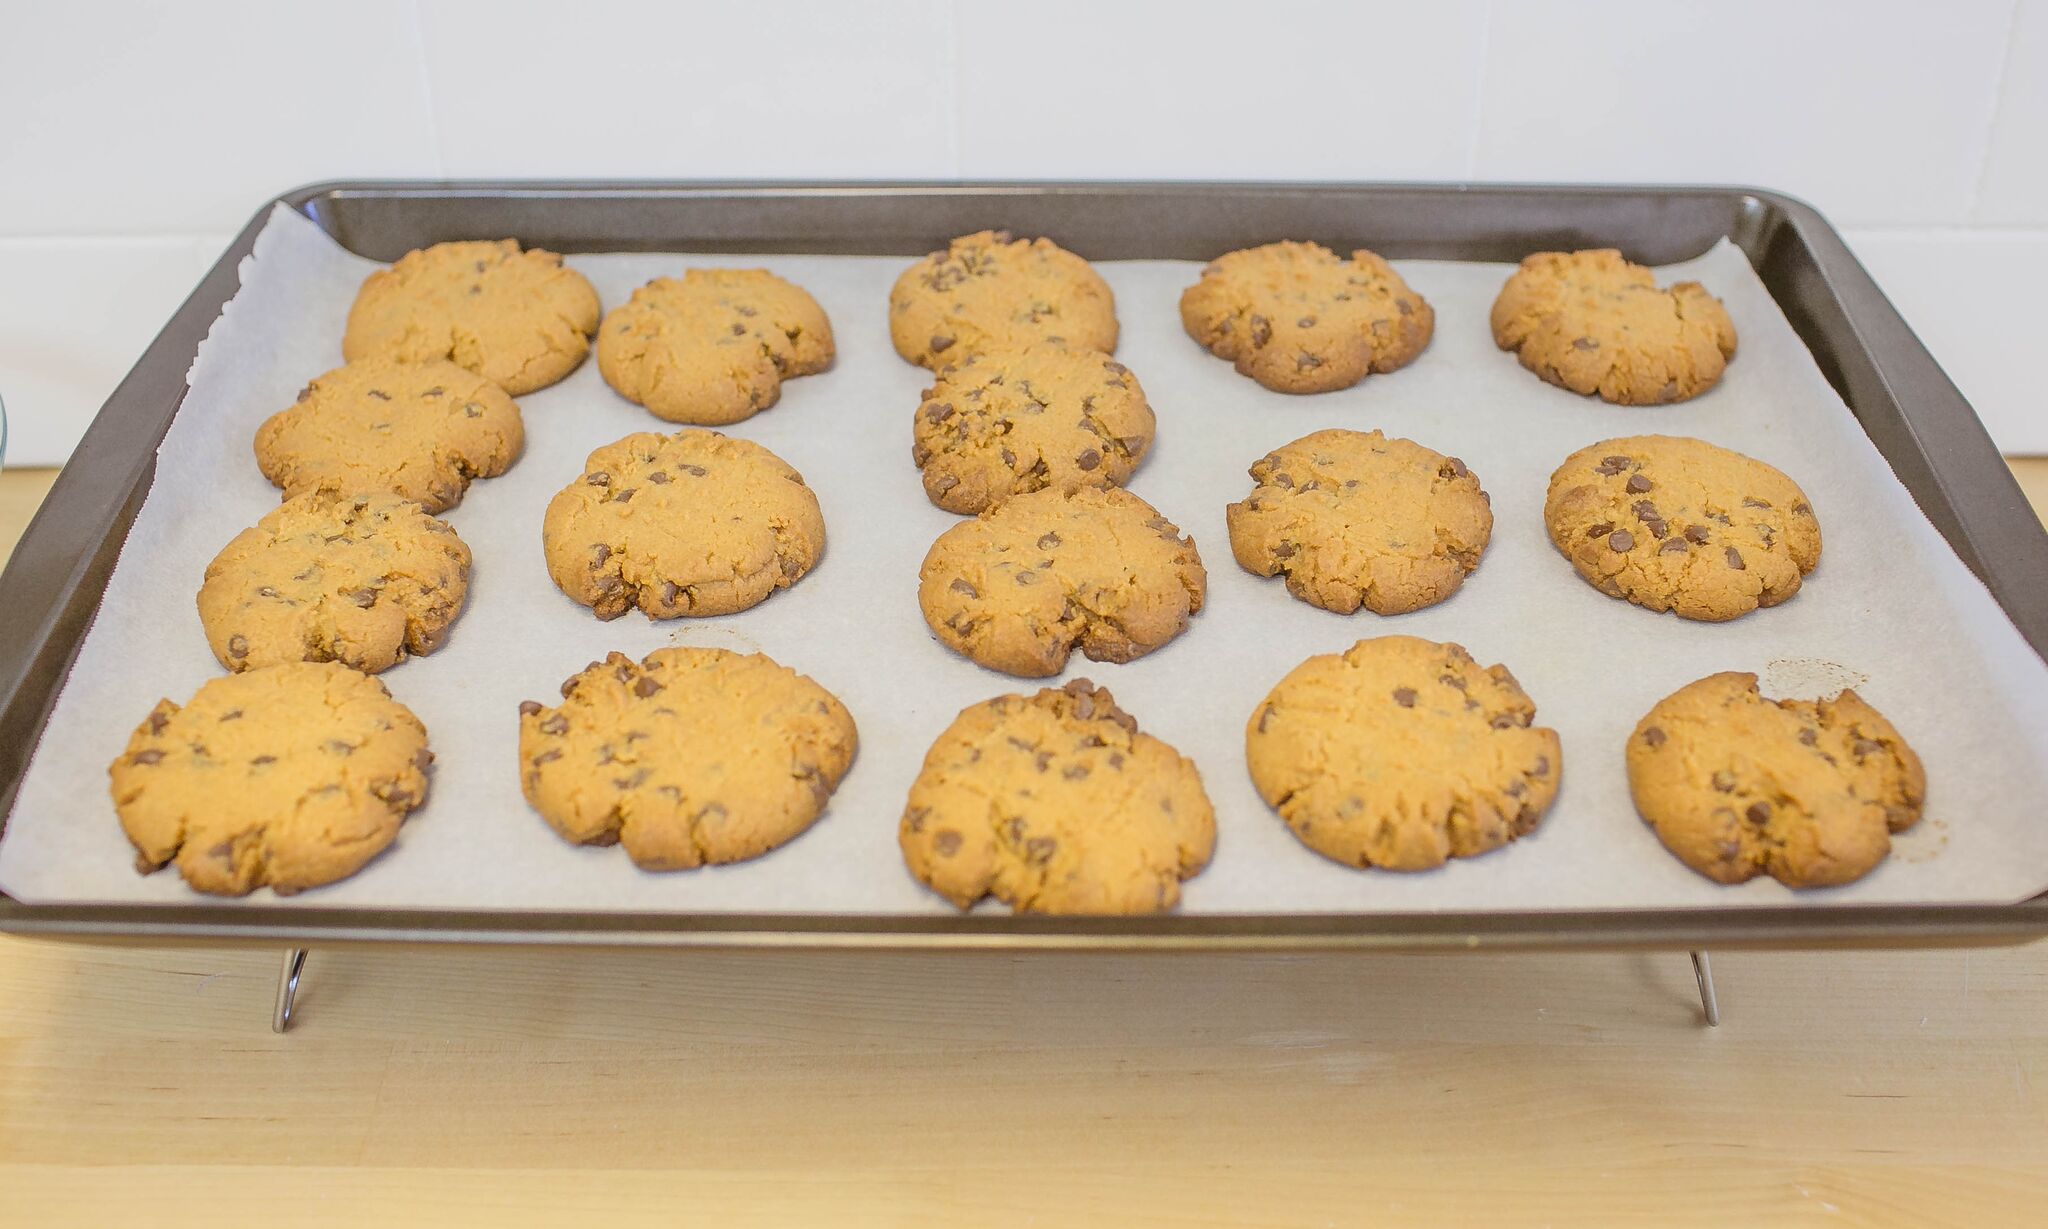 Bake nut-free cookies for 10-12 minutes or until lightly golden brown.